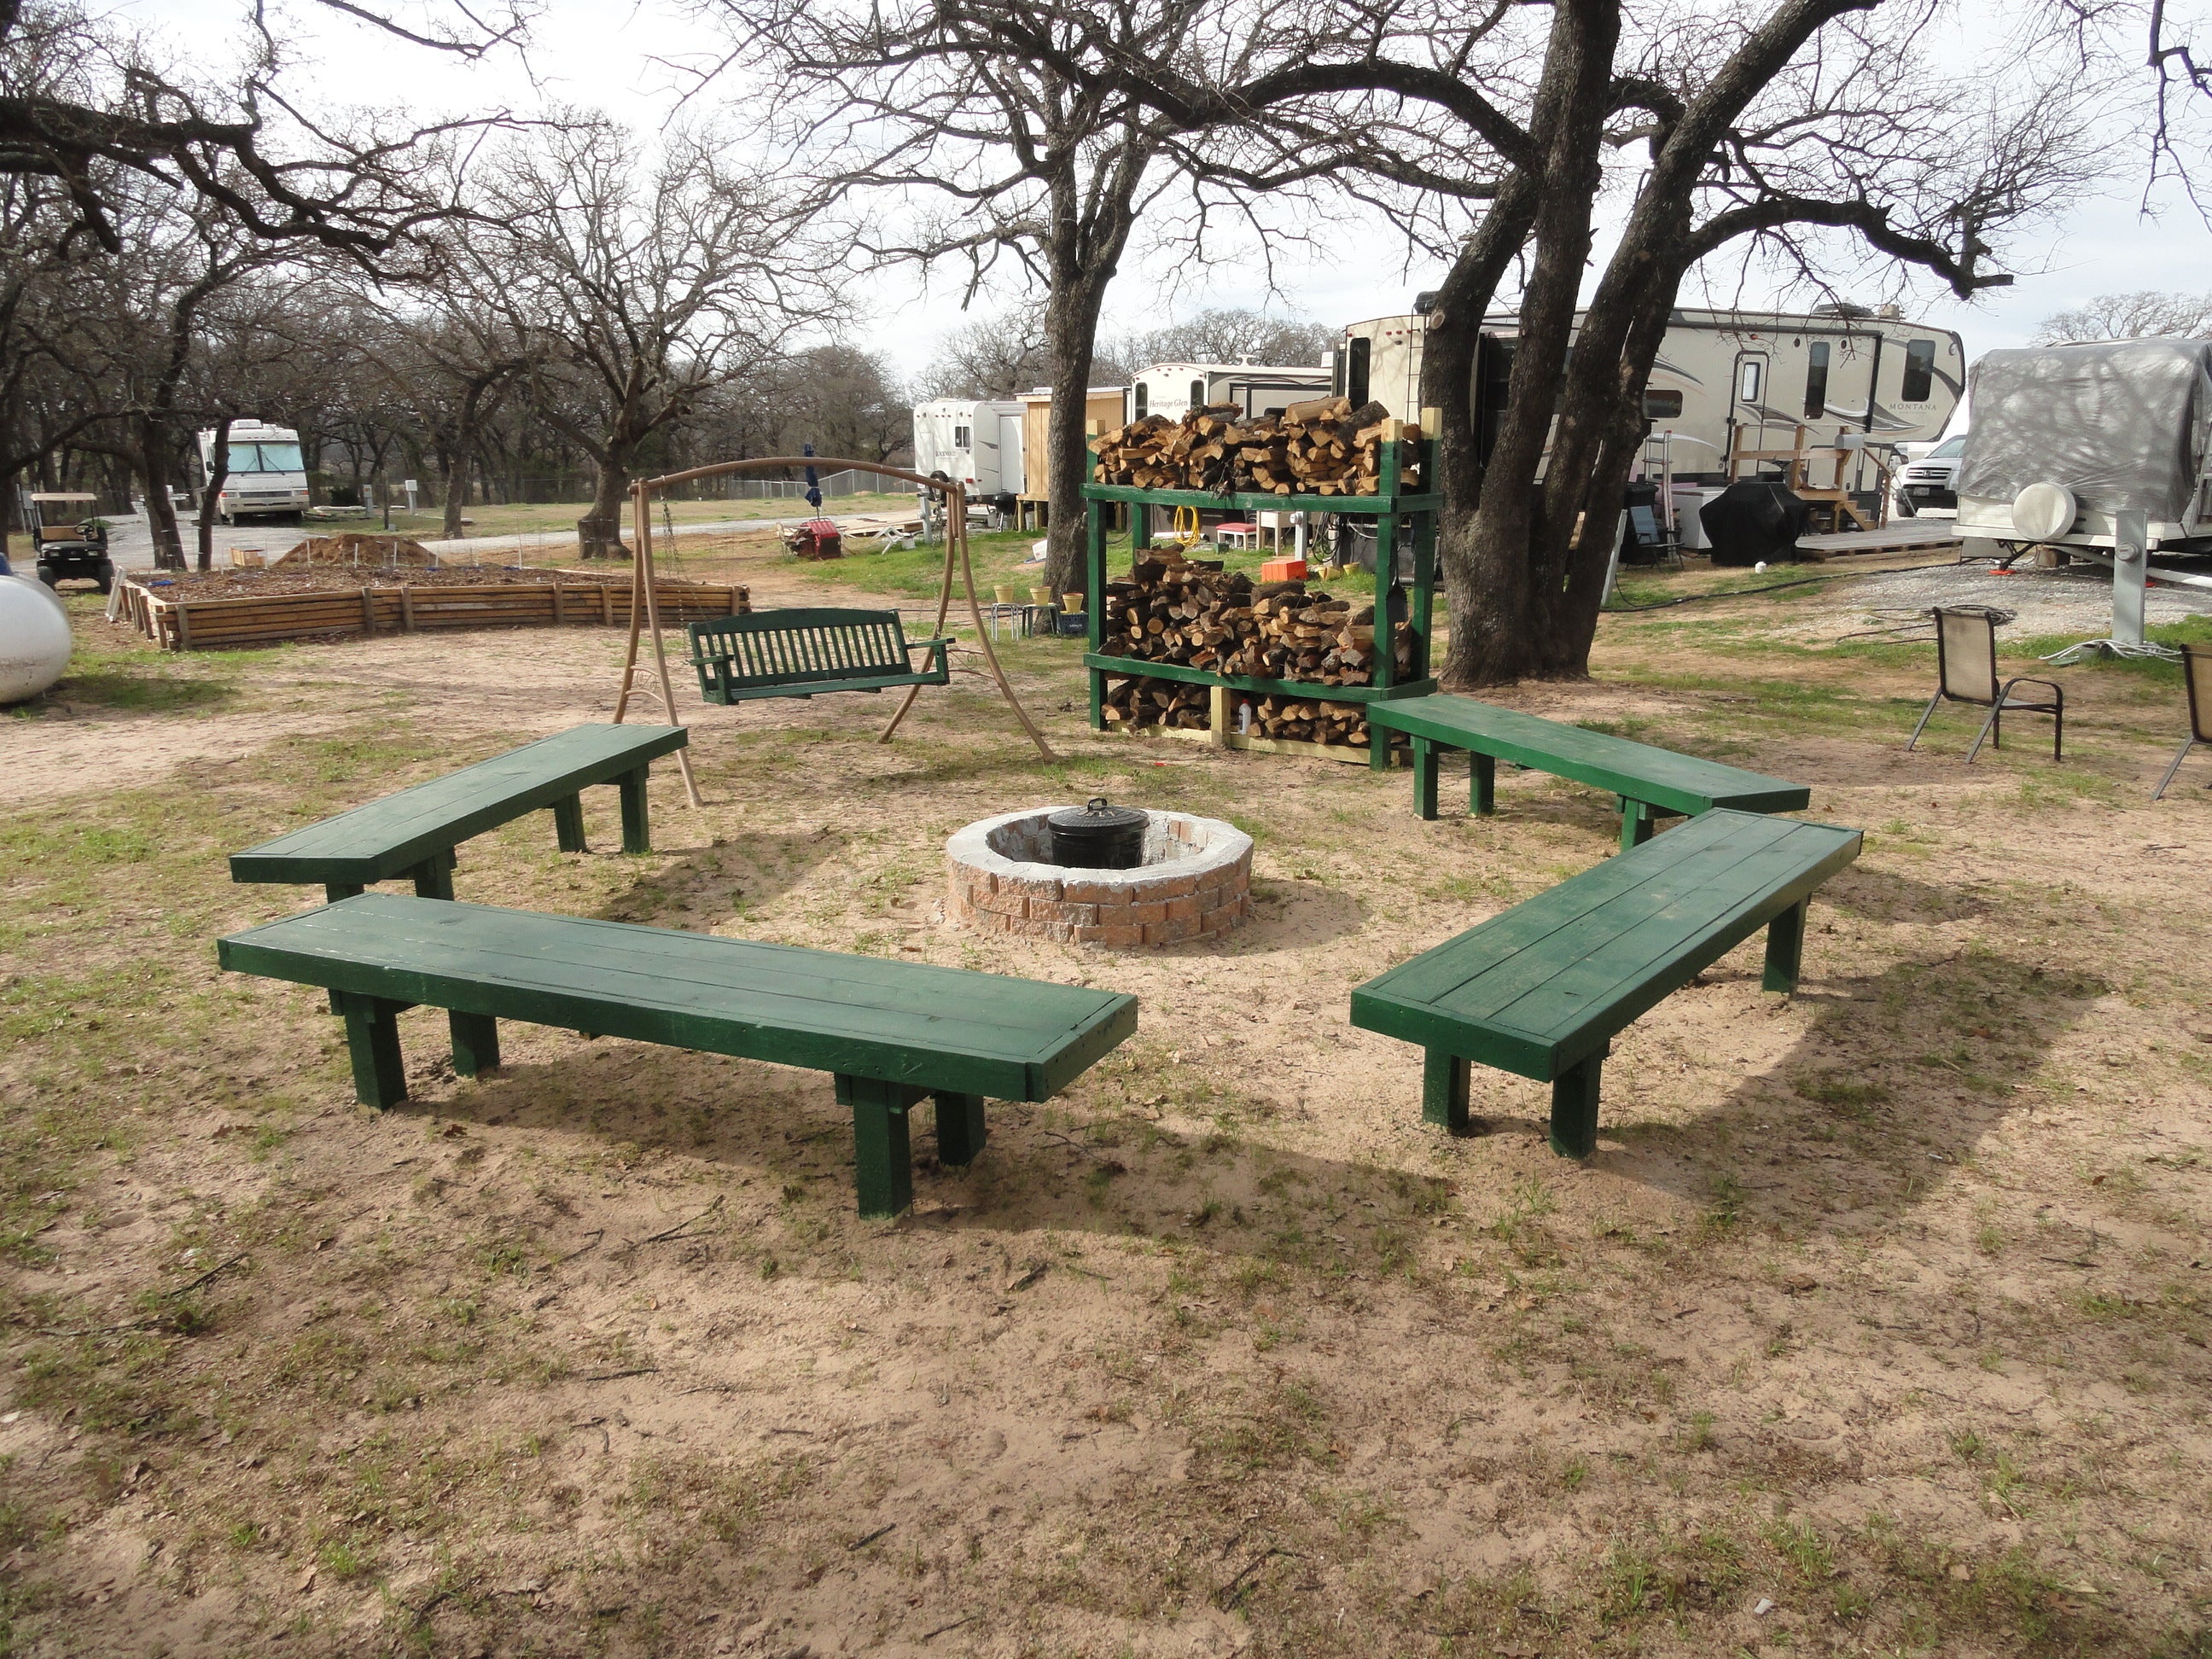 Community fire pit in the Green Space.